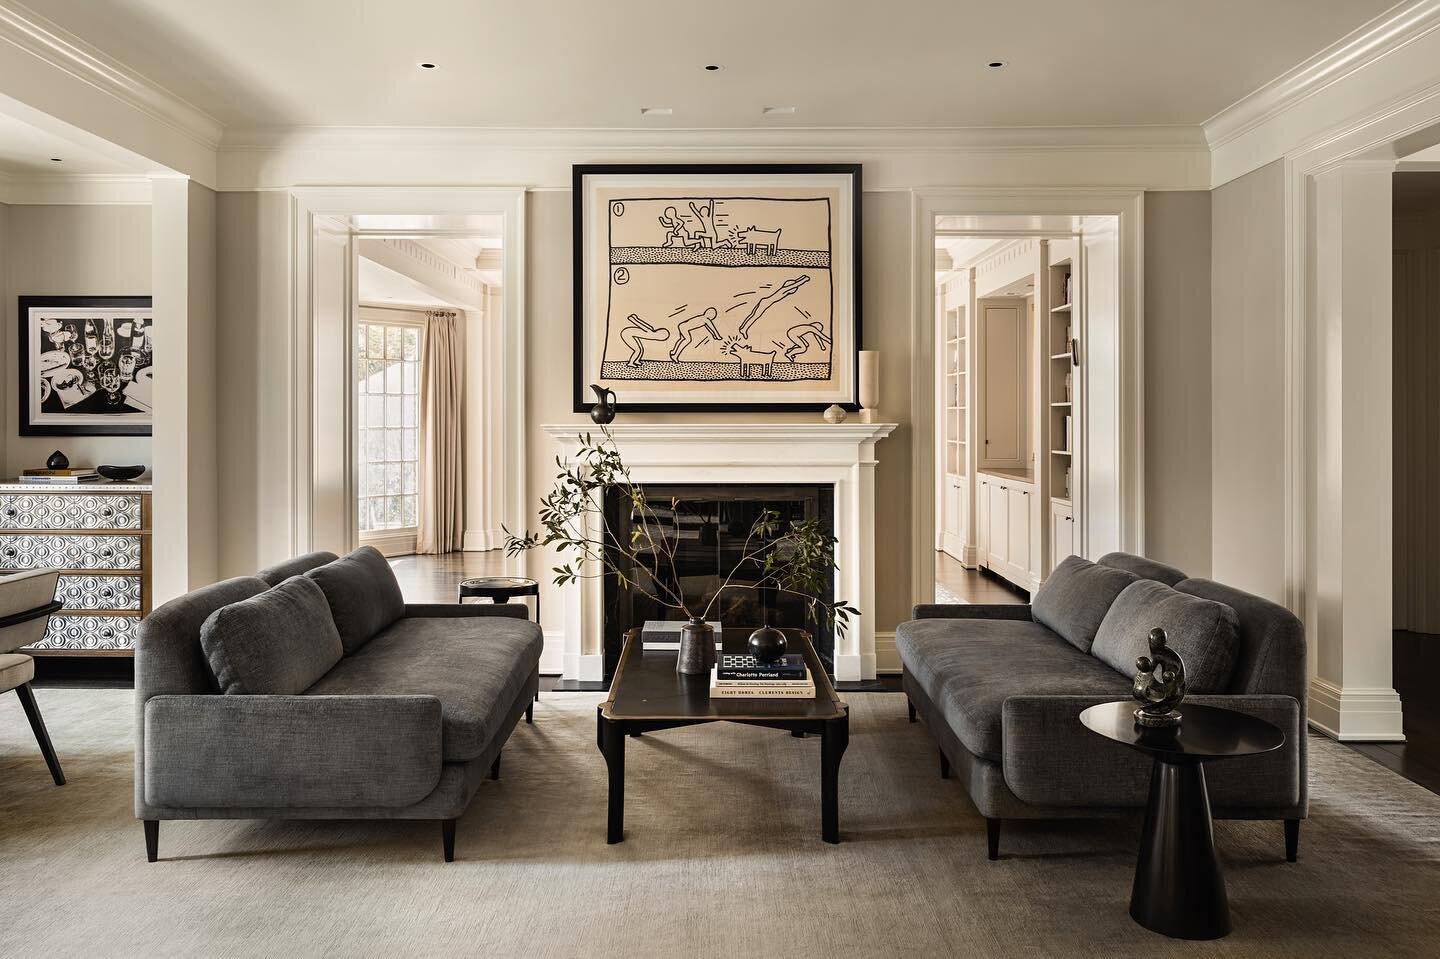 This snow storm has me wishing I was curling up with a good book in front of these beautiful fireplaces 🪵🔥 These timeless architectural moments will always kindle mood and conversation. 

For a @mansionglobal article, @tracy.kaler gathered insight 